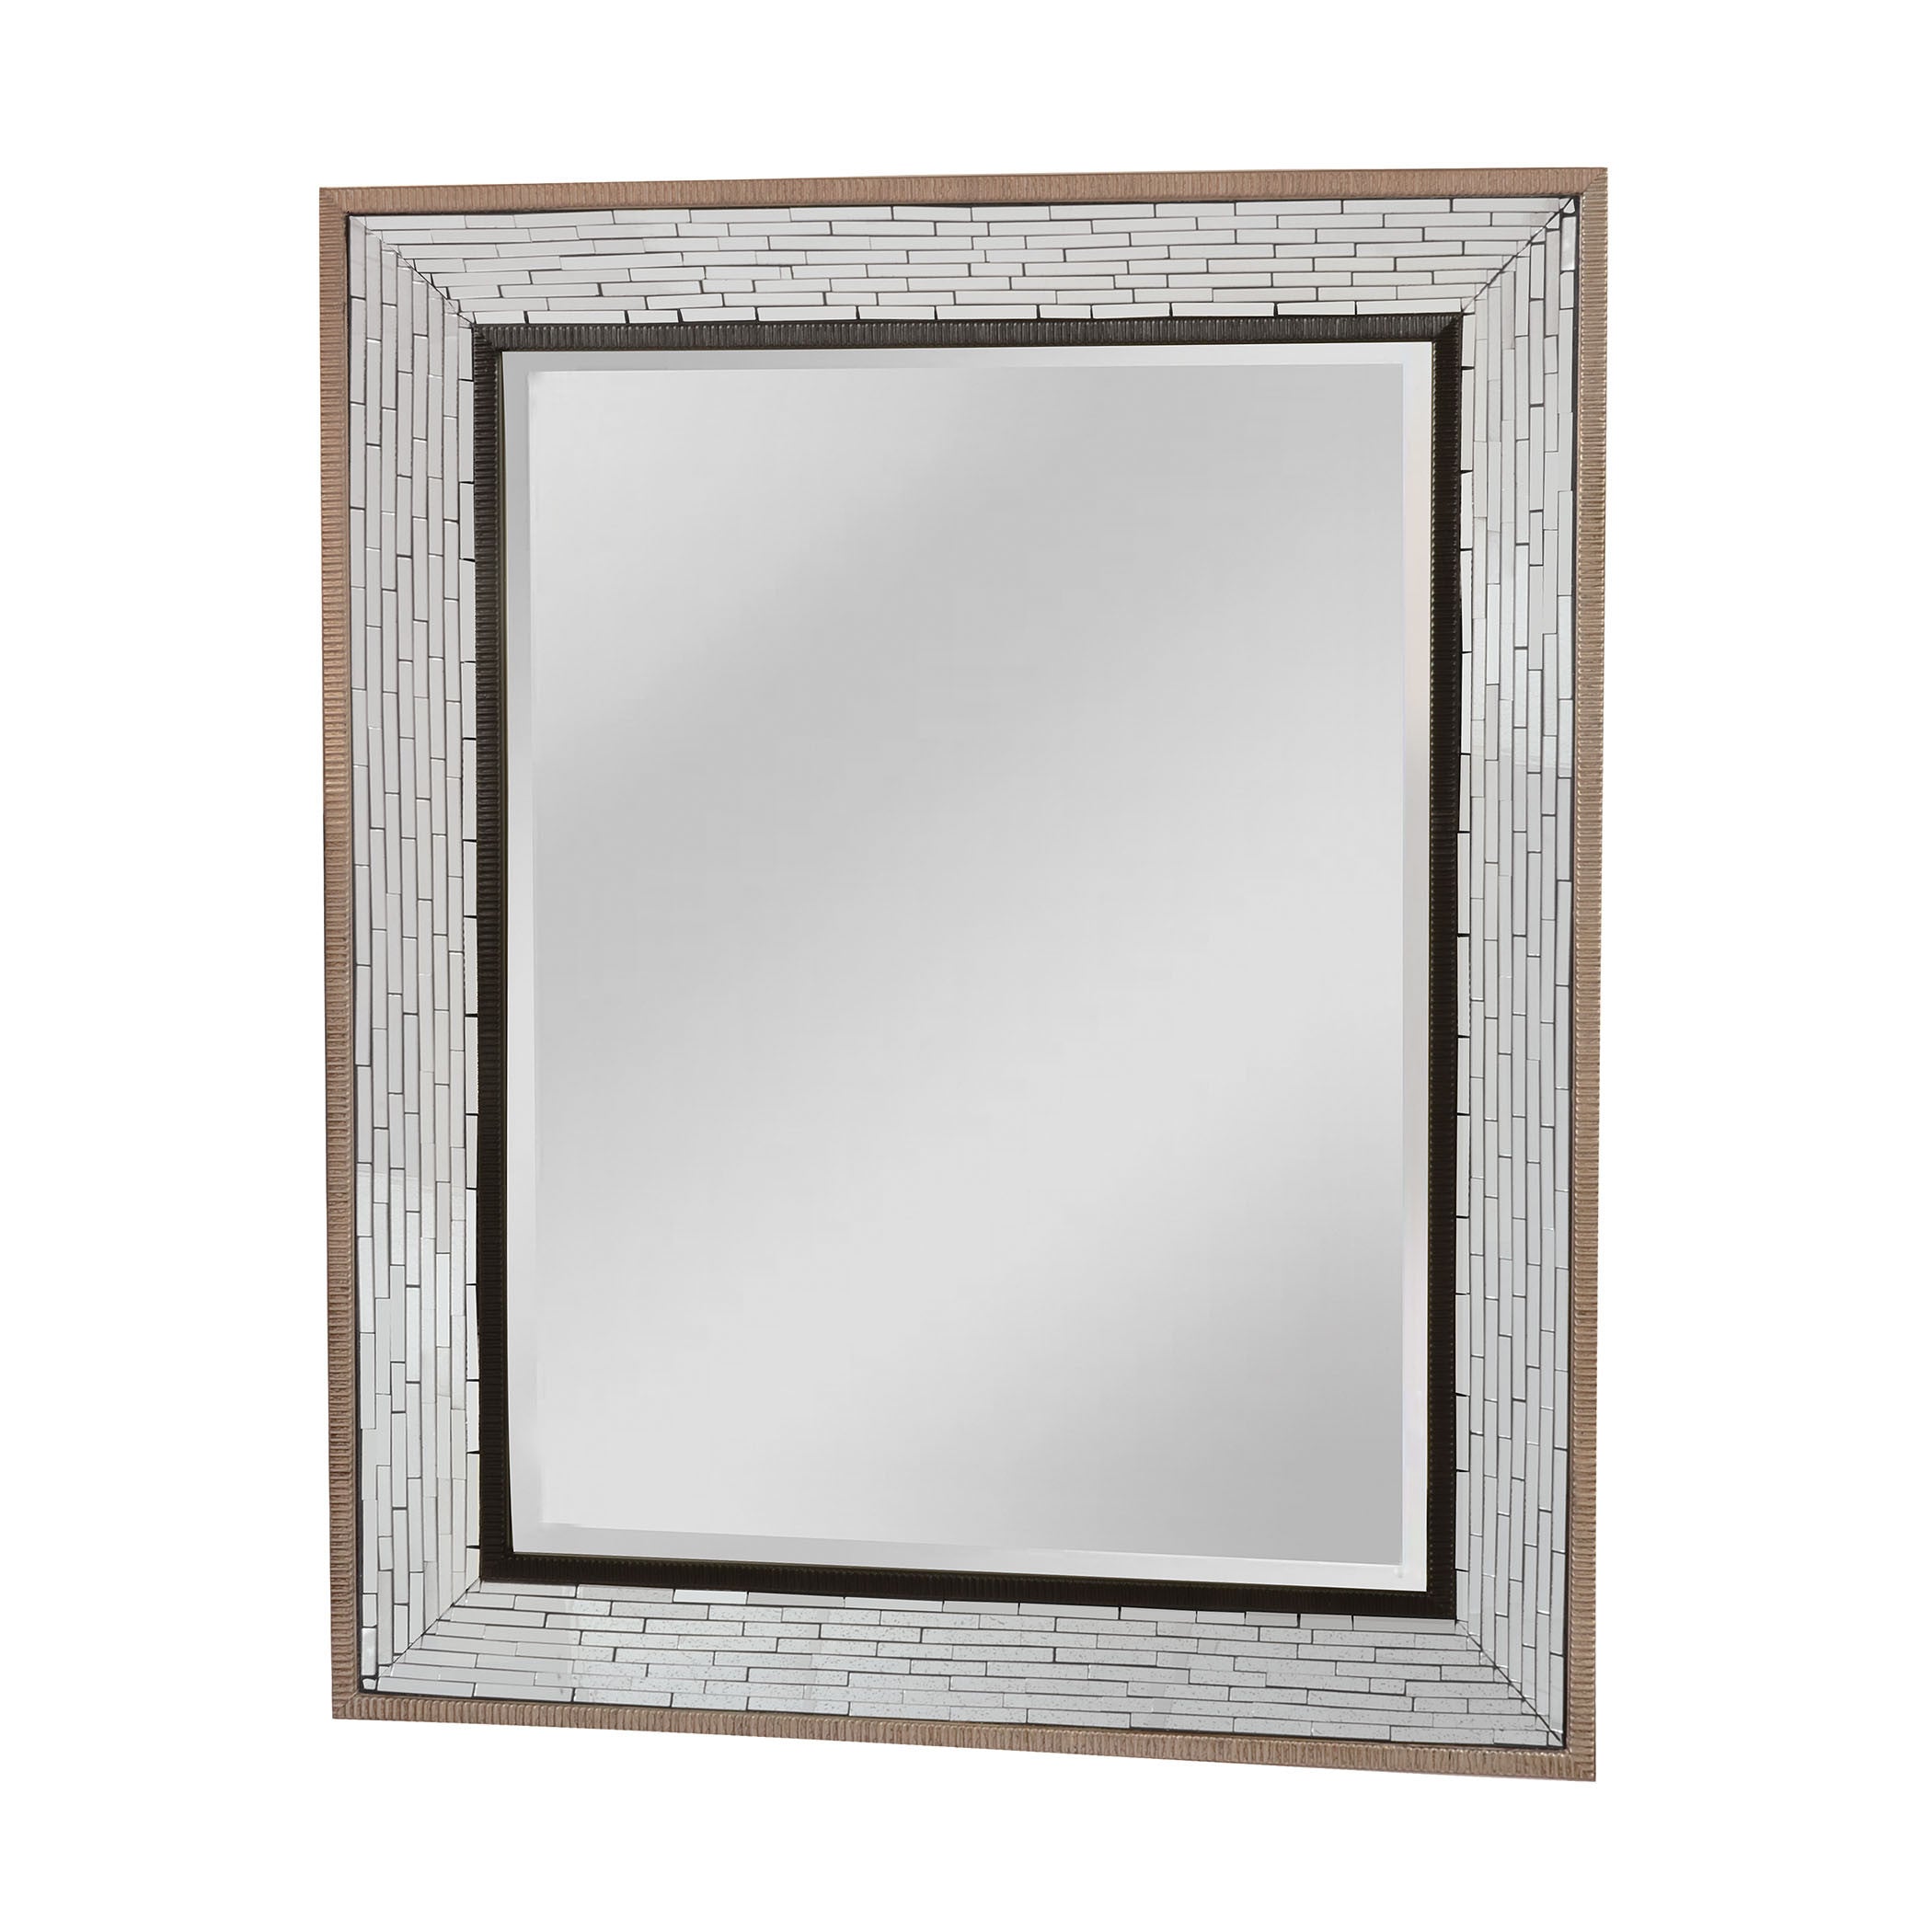 Mirror Masters Mg4510-0000 Fredmont Collection Brown,black,clear Finish Wall Mirror